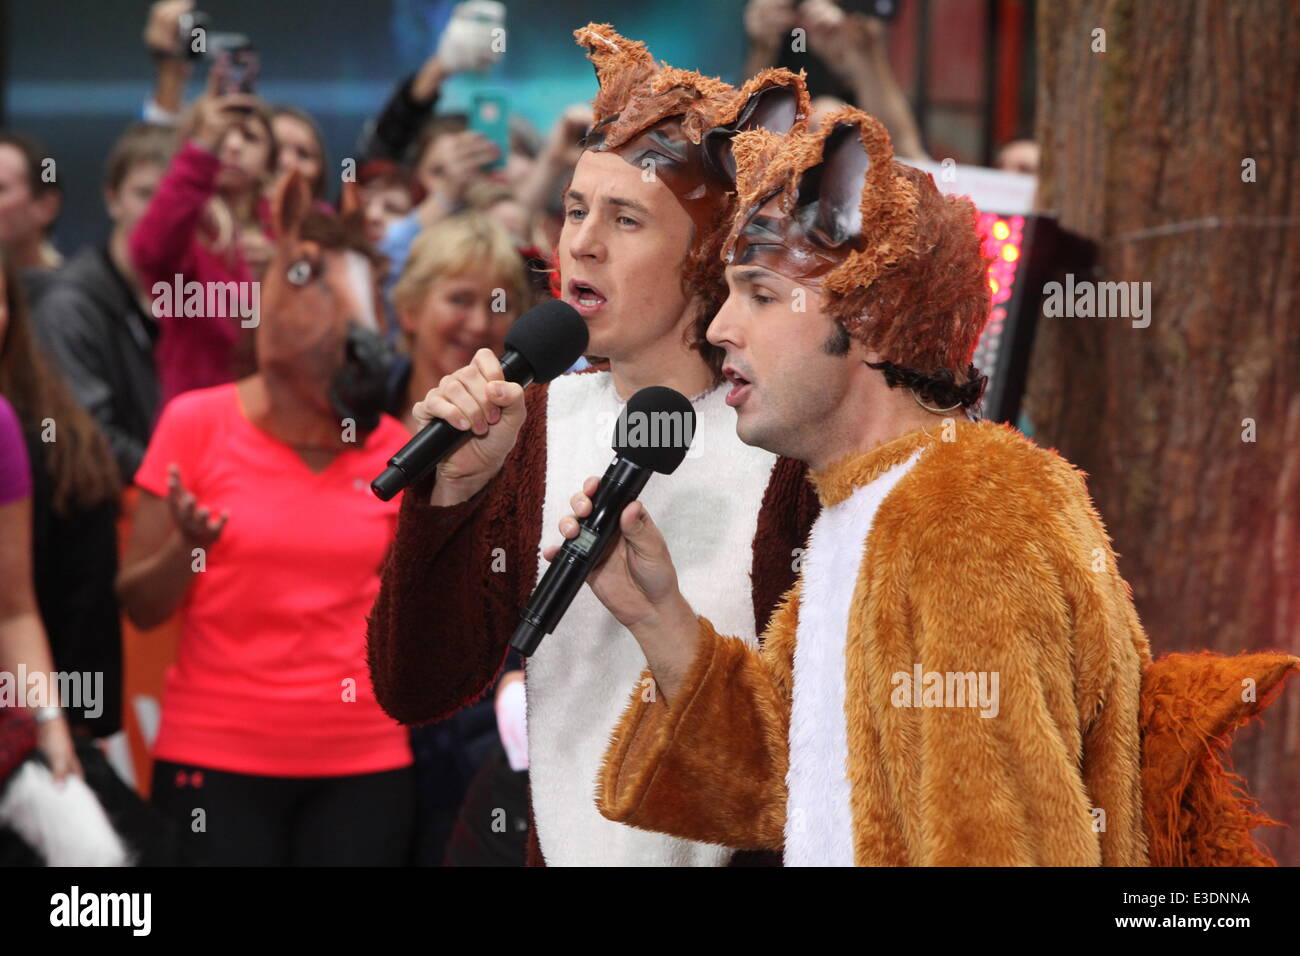 Ylvis: The Fox Performing What Does the Fox Say